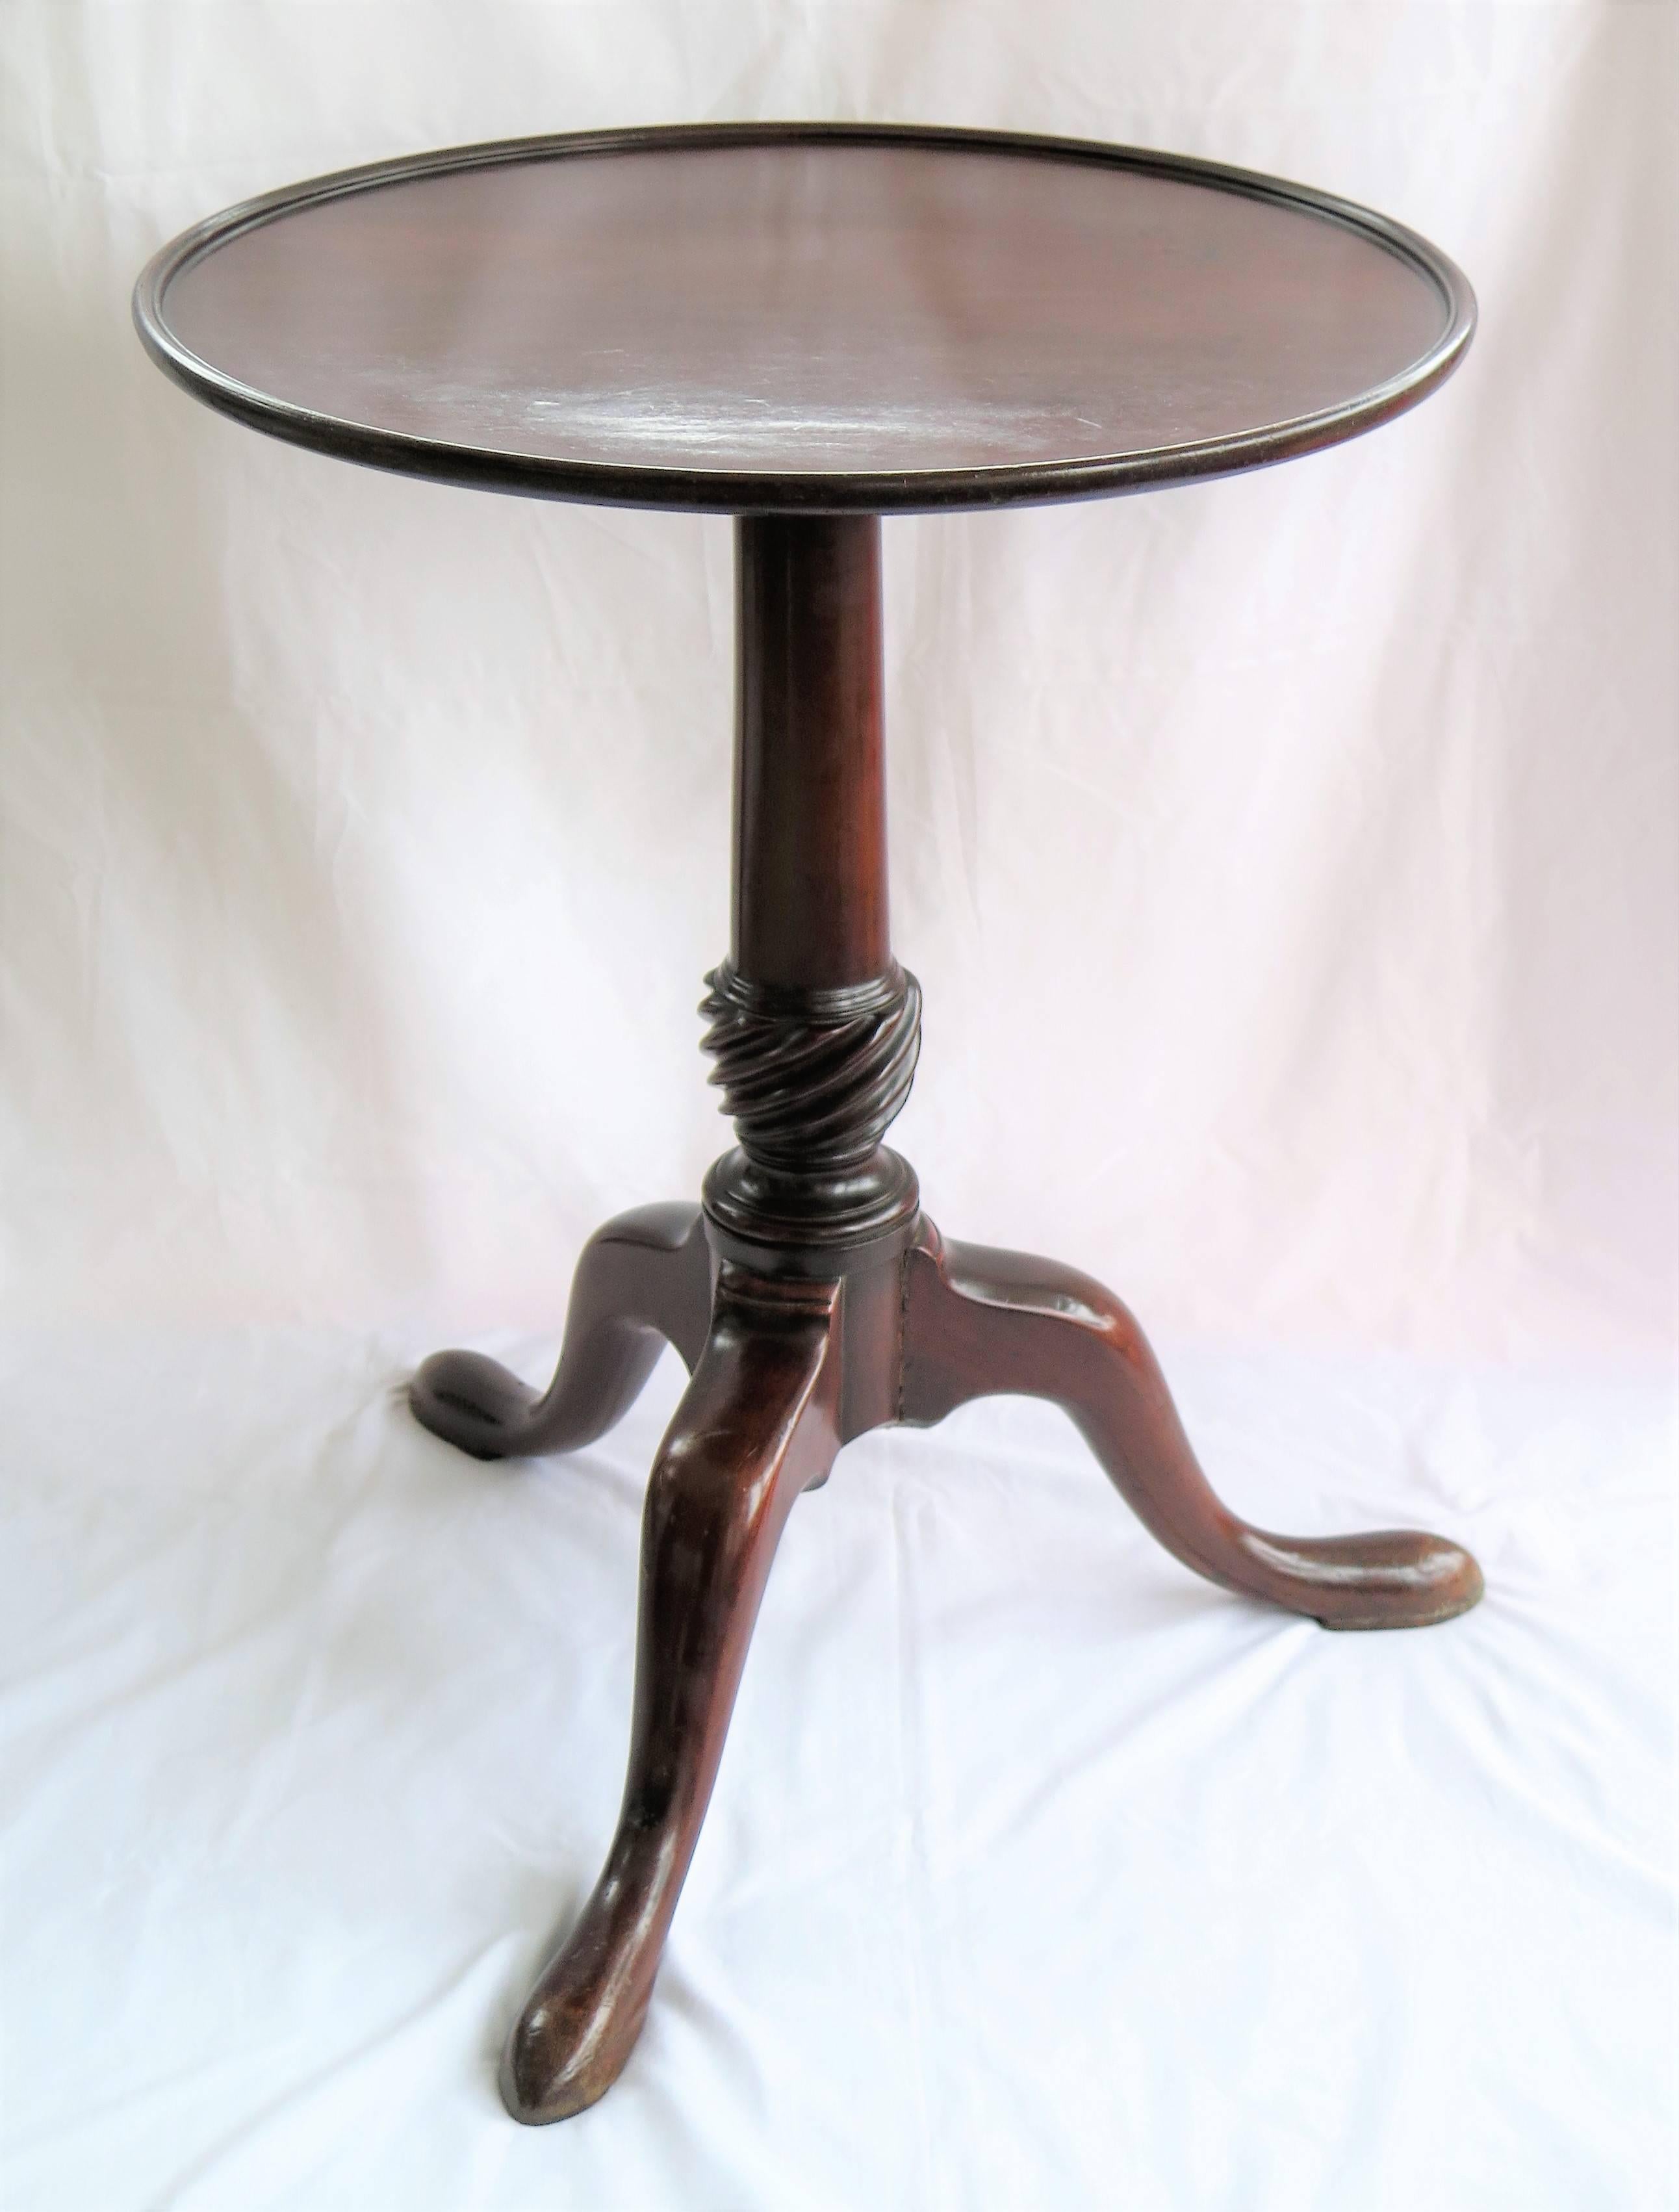 This is an elegant and beautifully proportioned, solid Mahogany, Tripod Table dating to the Mid Georgian Chippendale Period of George 11nd, circa 1750.

The dished top is made from one-piece of solid mahogany which has a finely figured grain. The